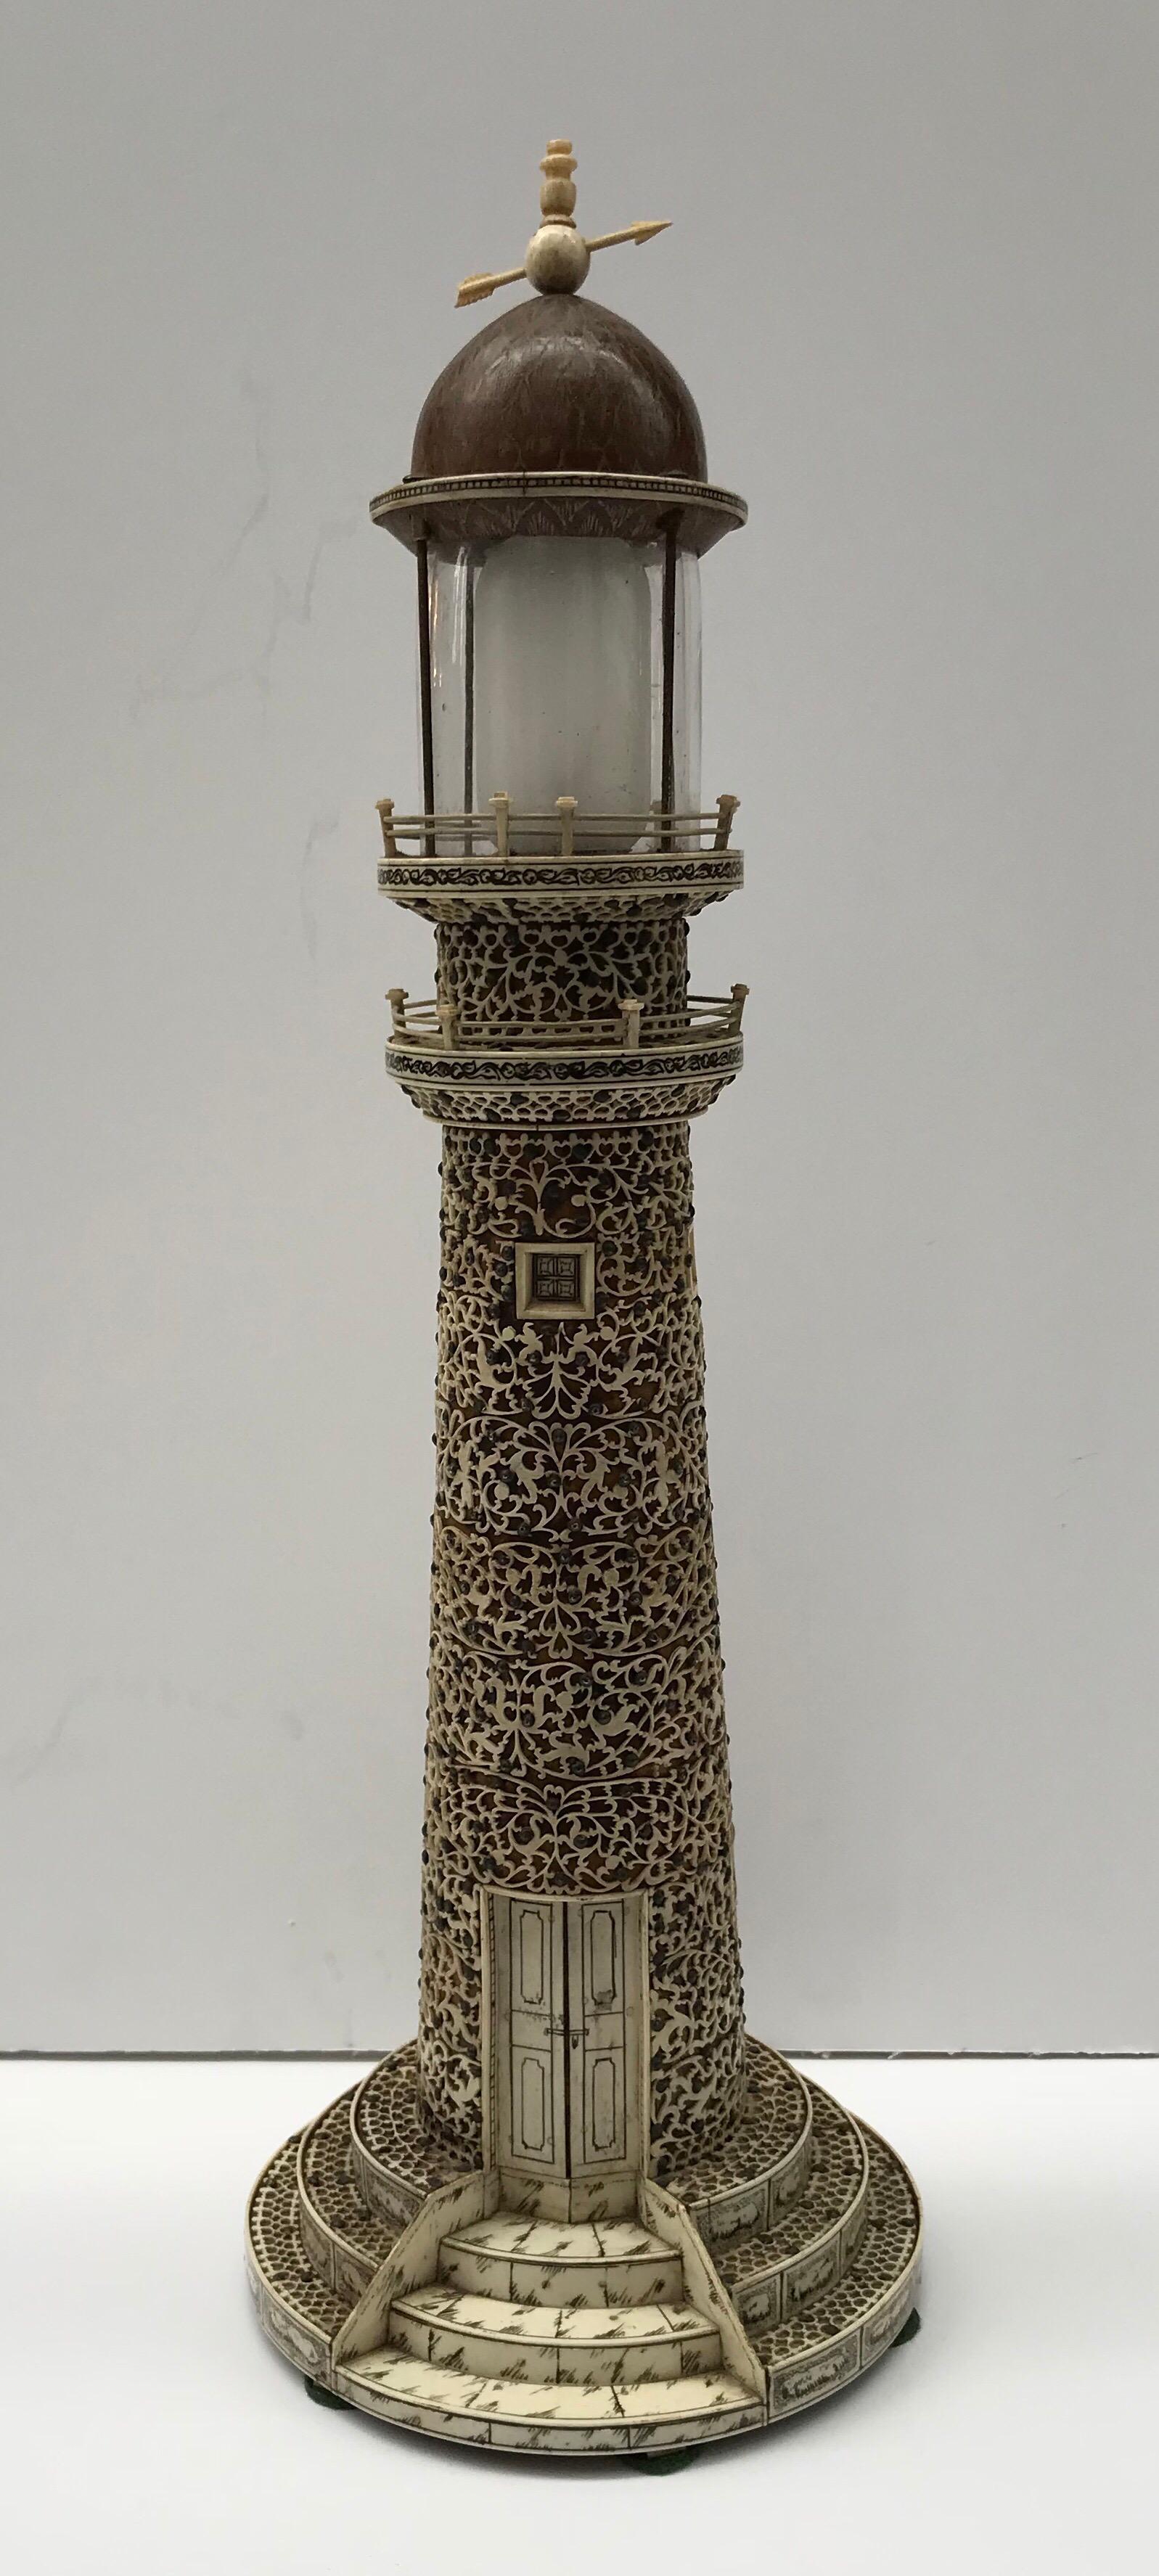 Rare late 19th century Indian bone and faux tortoiseshell model of the Visakhapatnam lighthouse with carved bone arrow weathervane over etched and polished coconut husk dome over galleried searchlight platform, the body overlaid with pierced bone